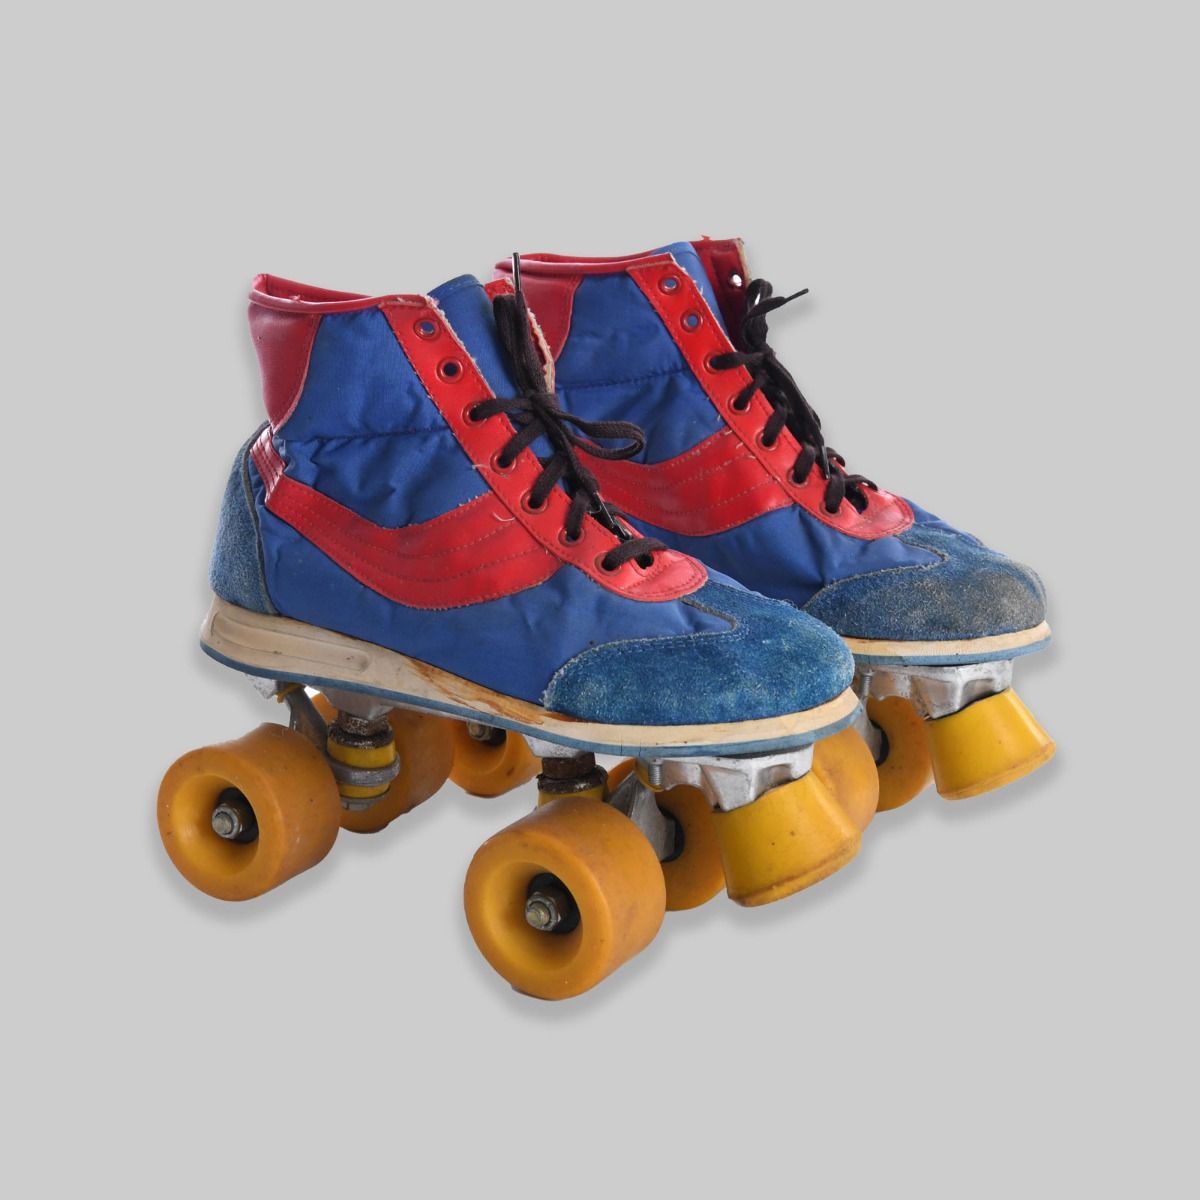 Blue and Red 1970s Roller Skates Size 7